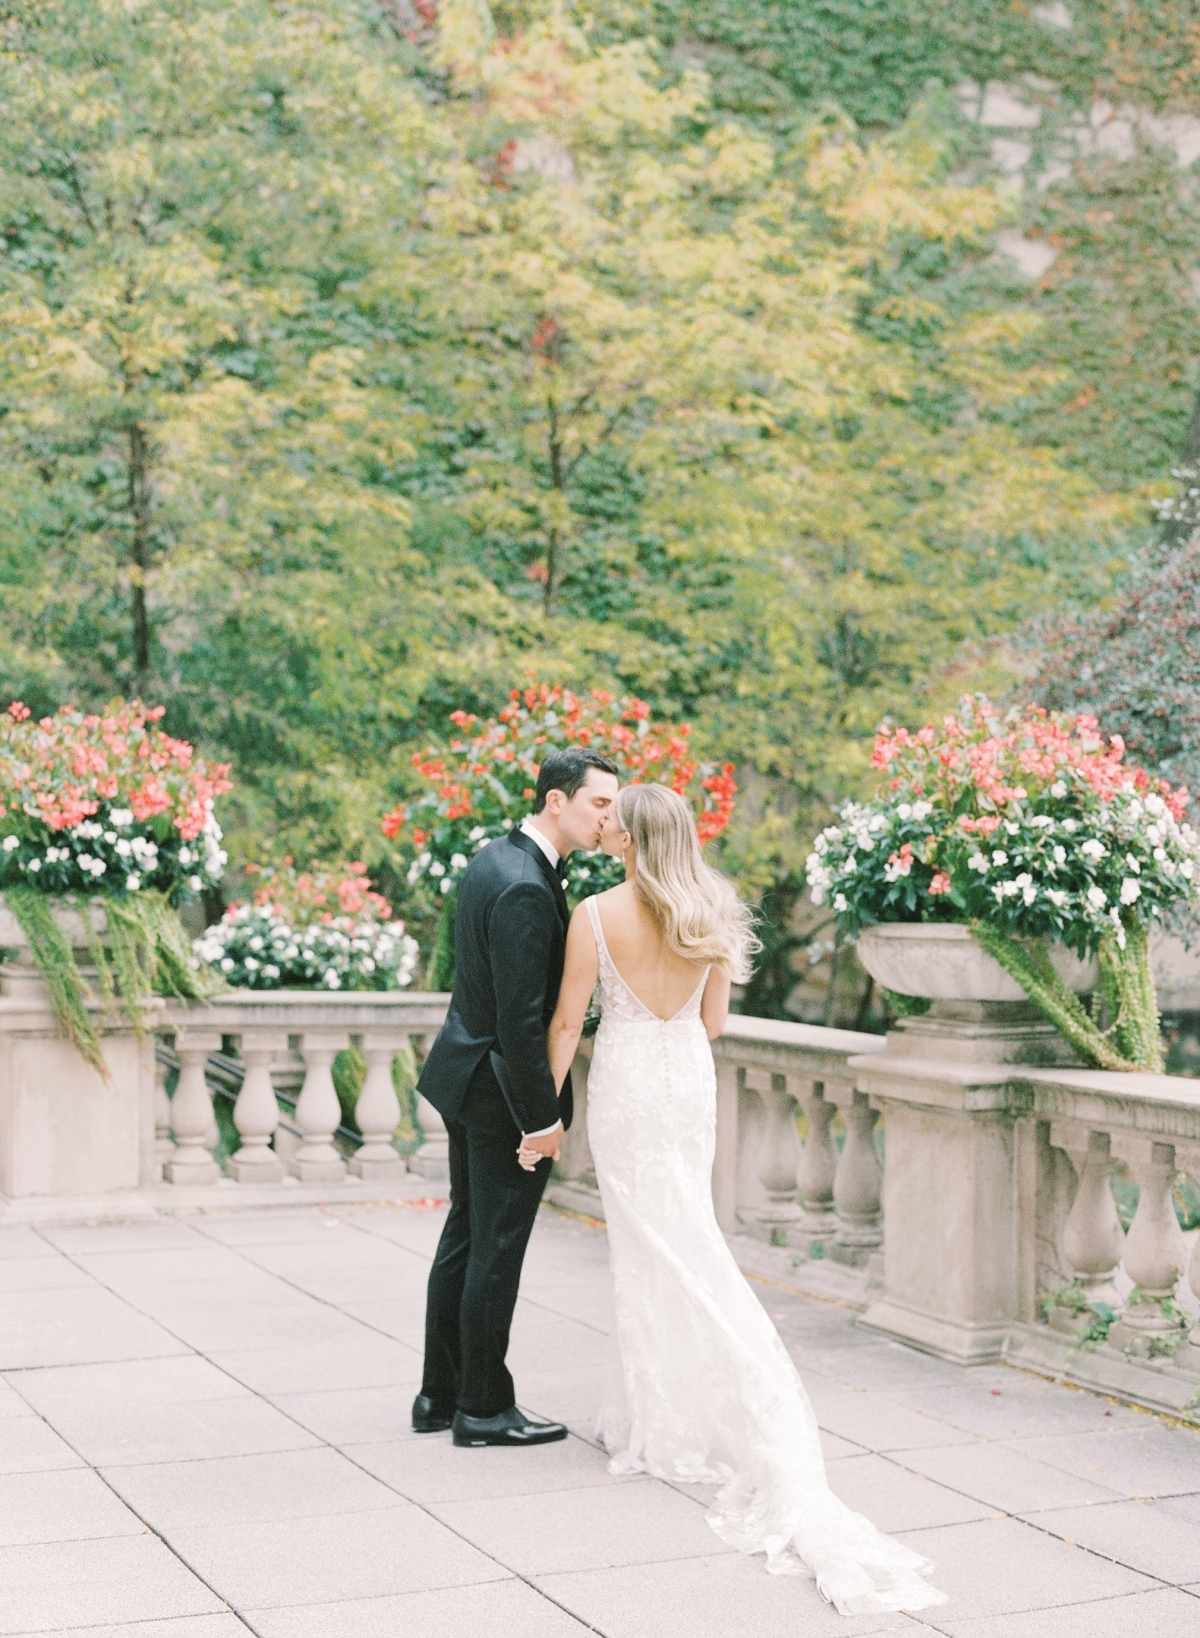 Classic Chicago Micro-Wedding in the Fall